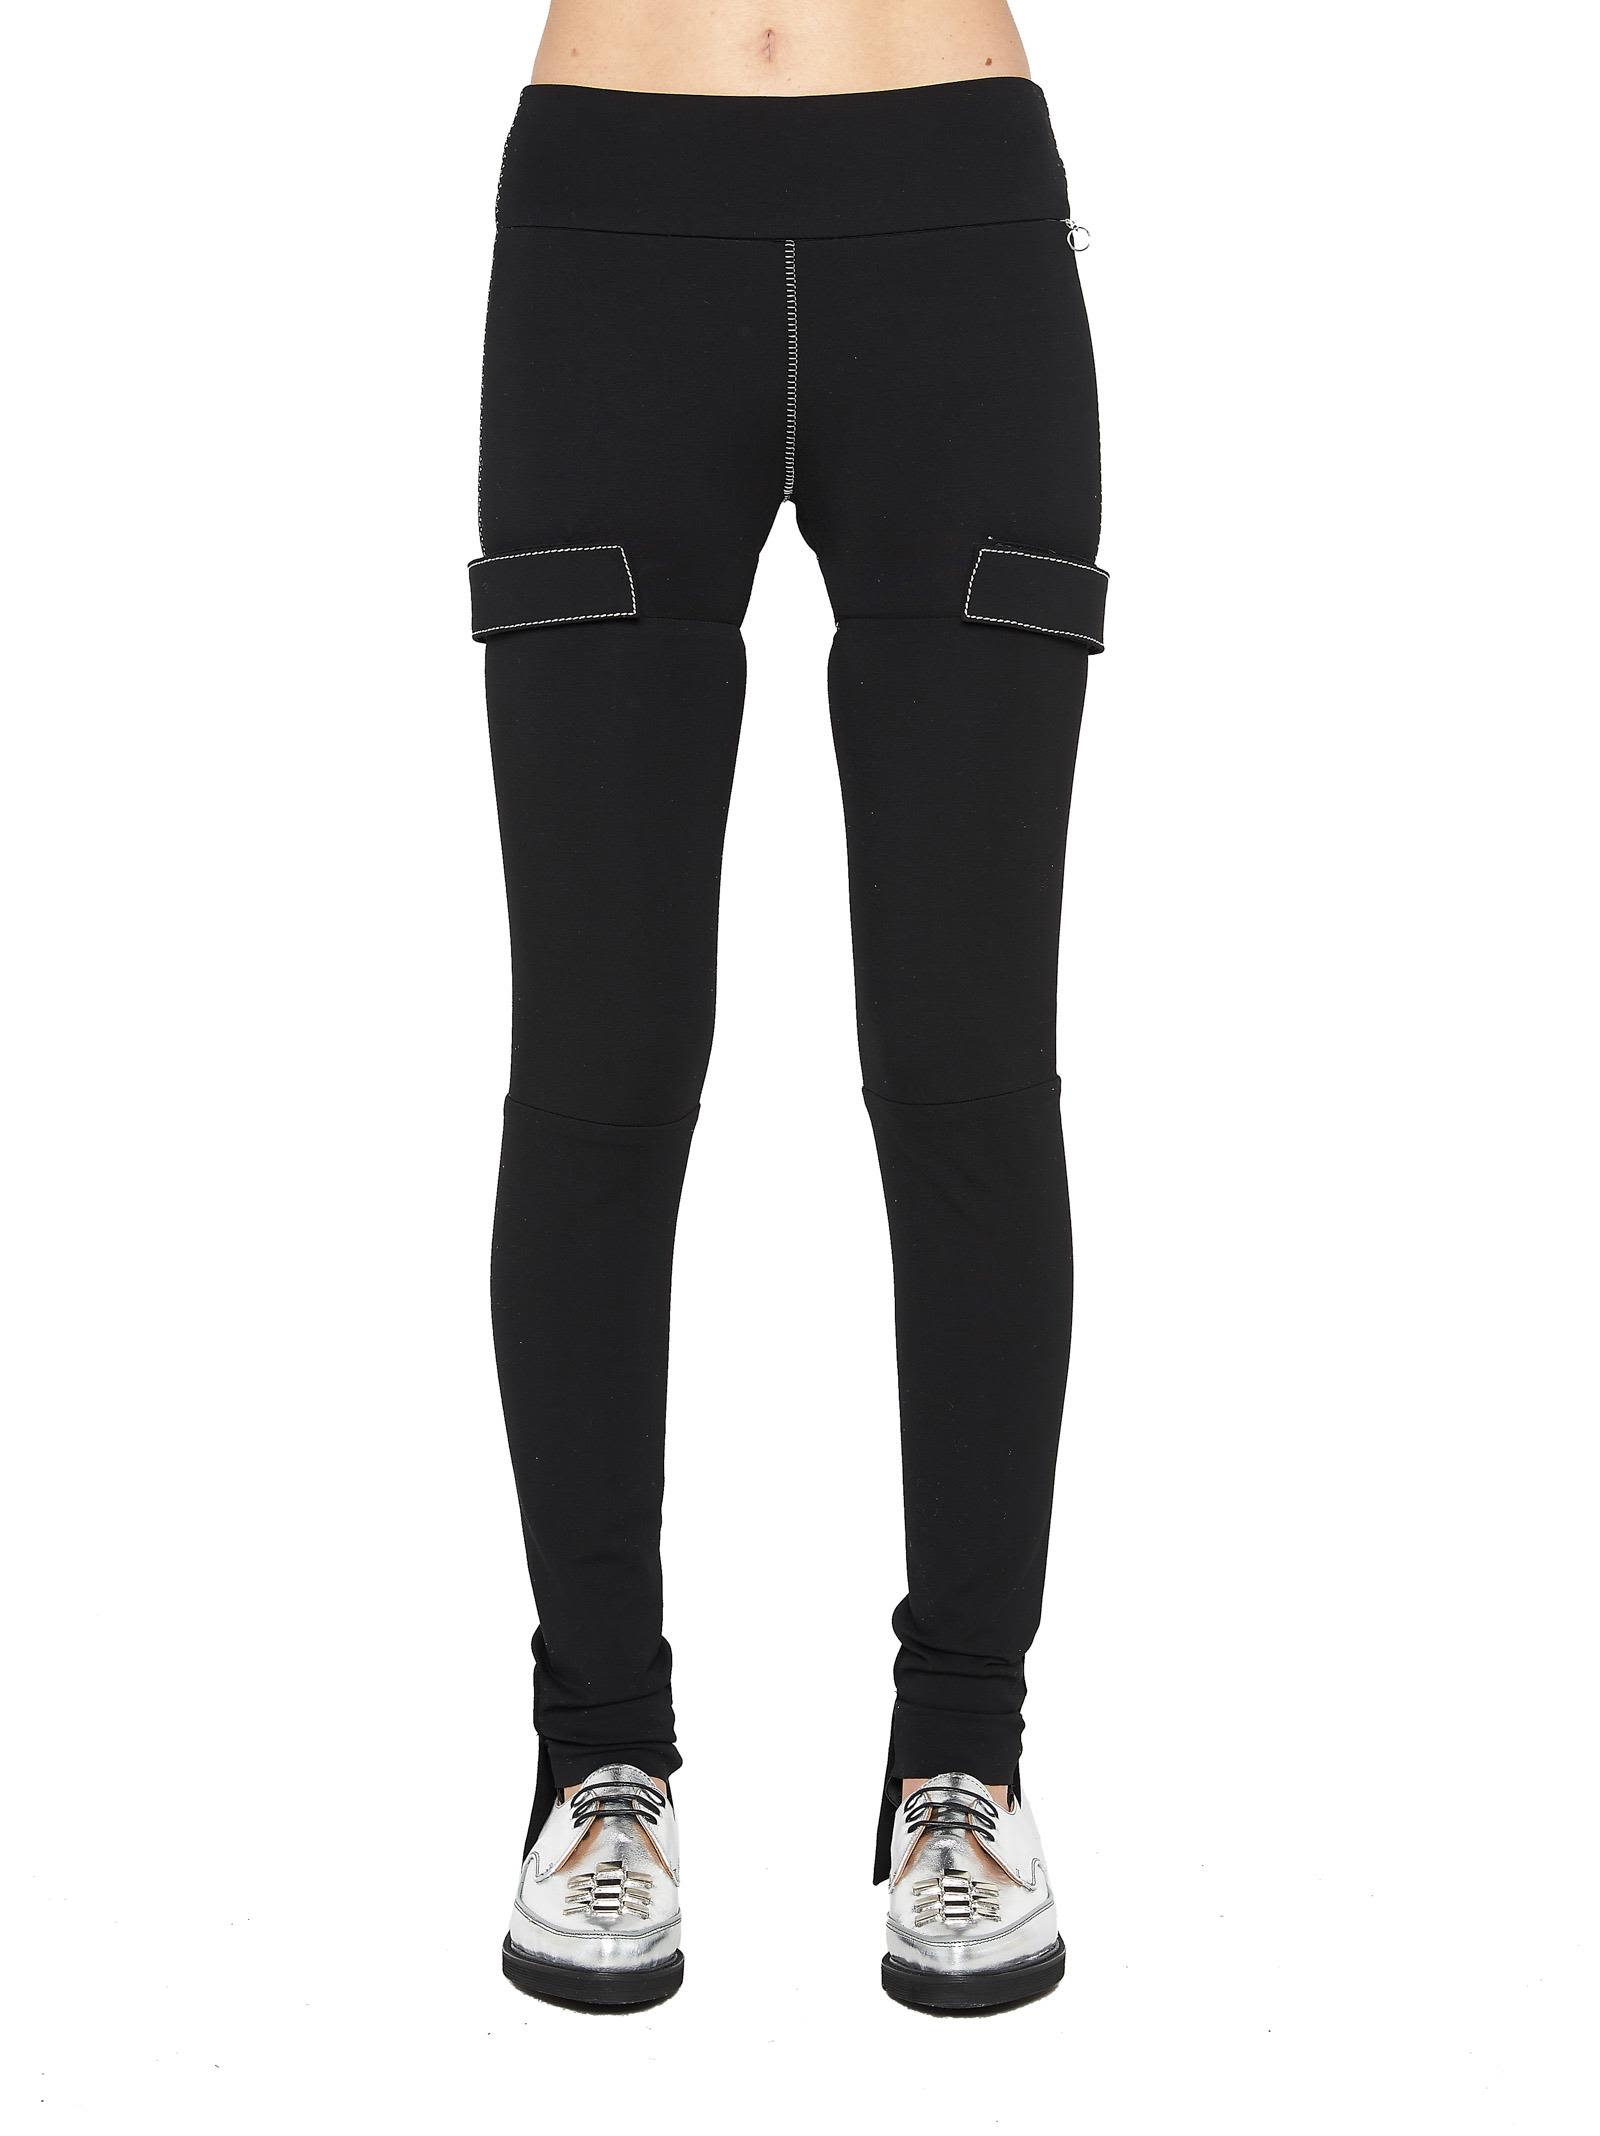 italist | Best price in the market for Alyx Alyx Pants - Black ...